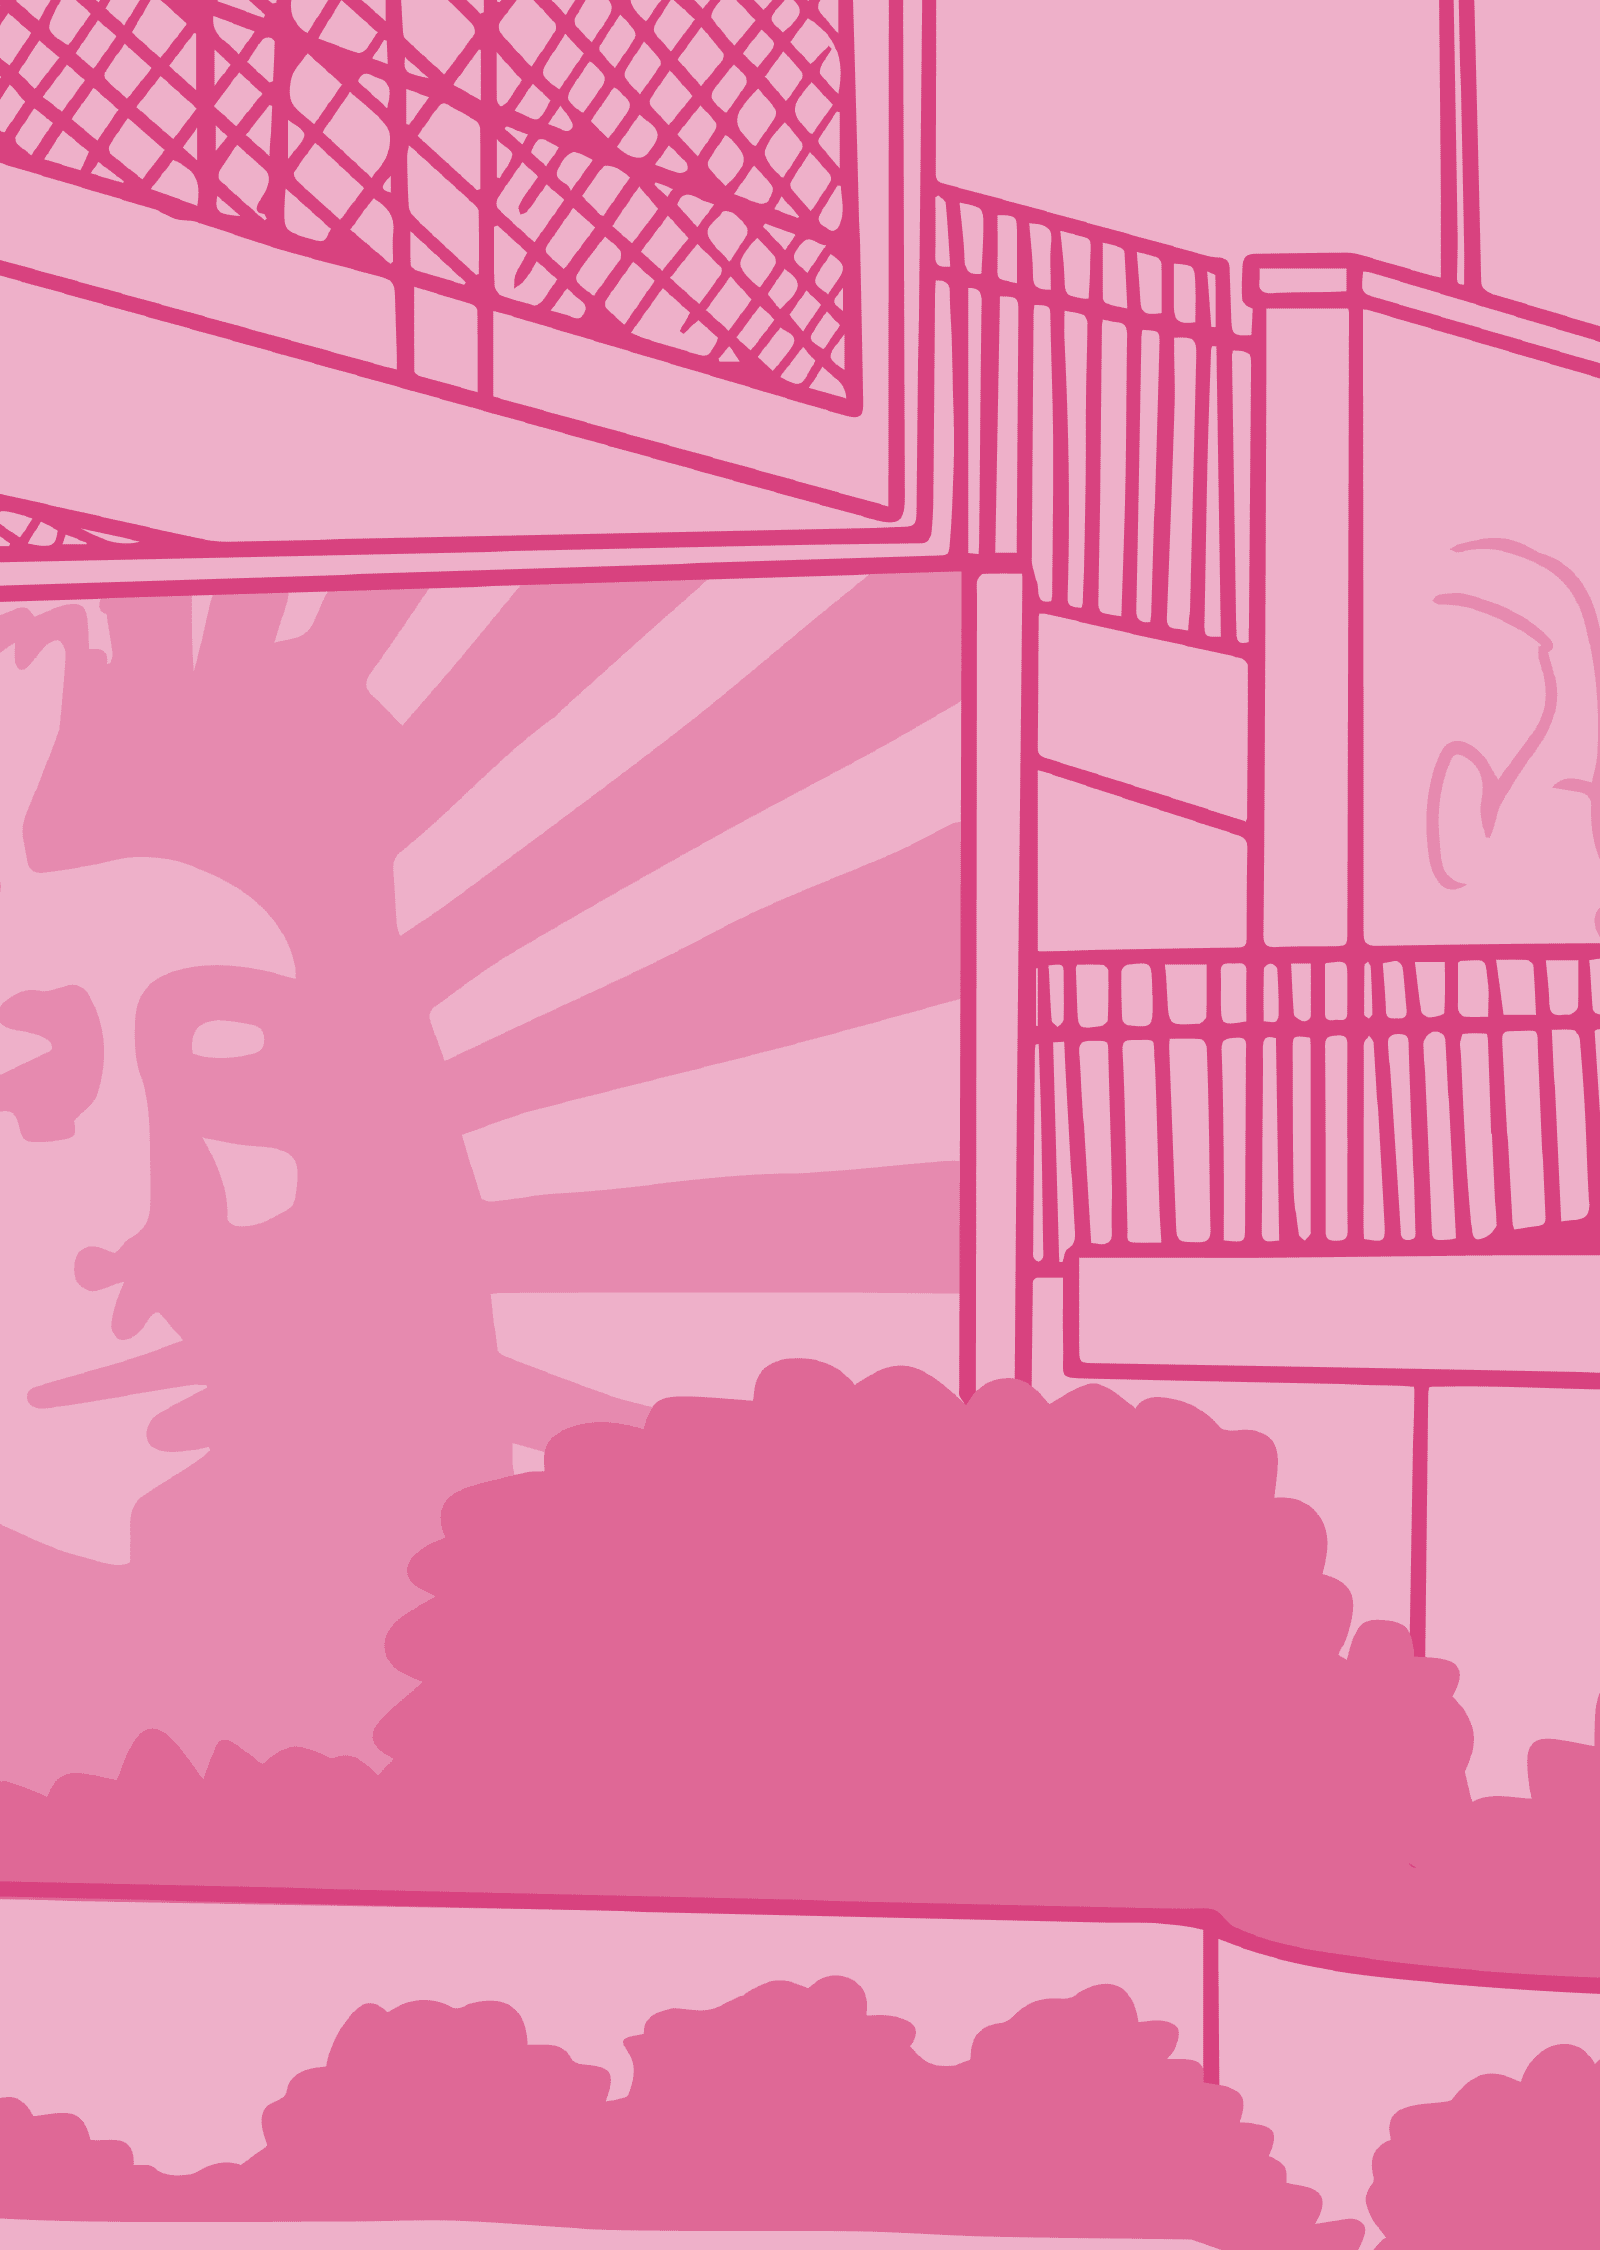 An illustration of a park mural in monochromatic pink